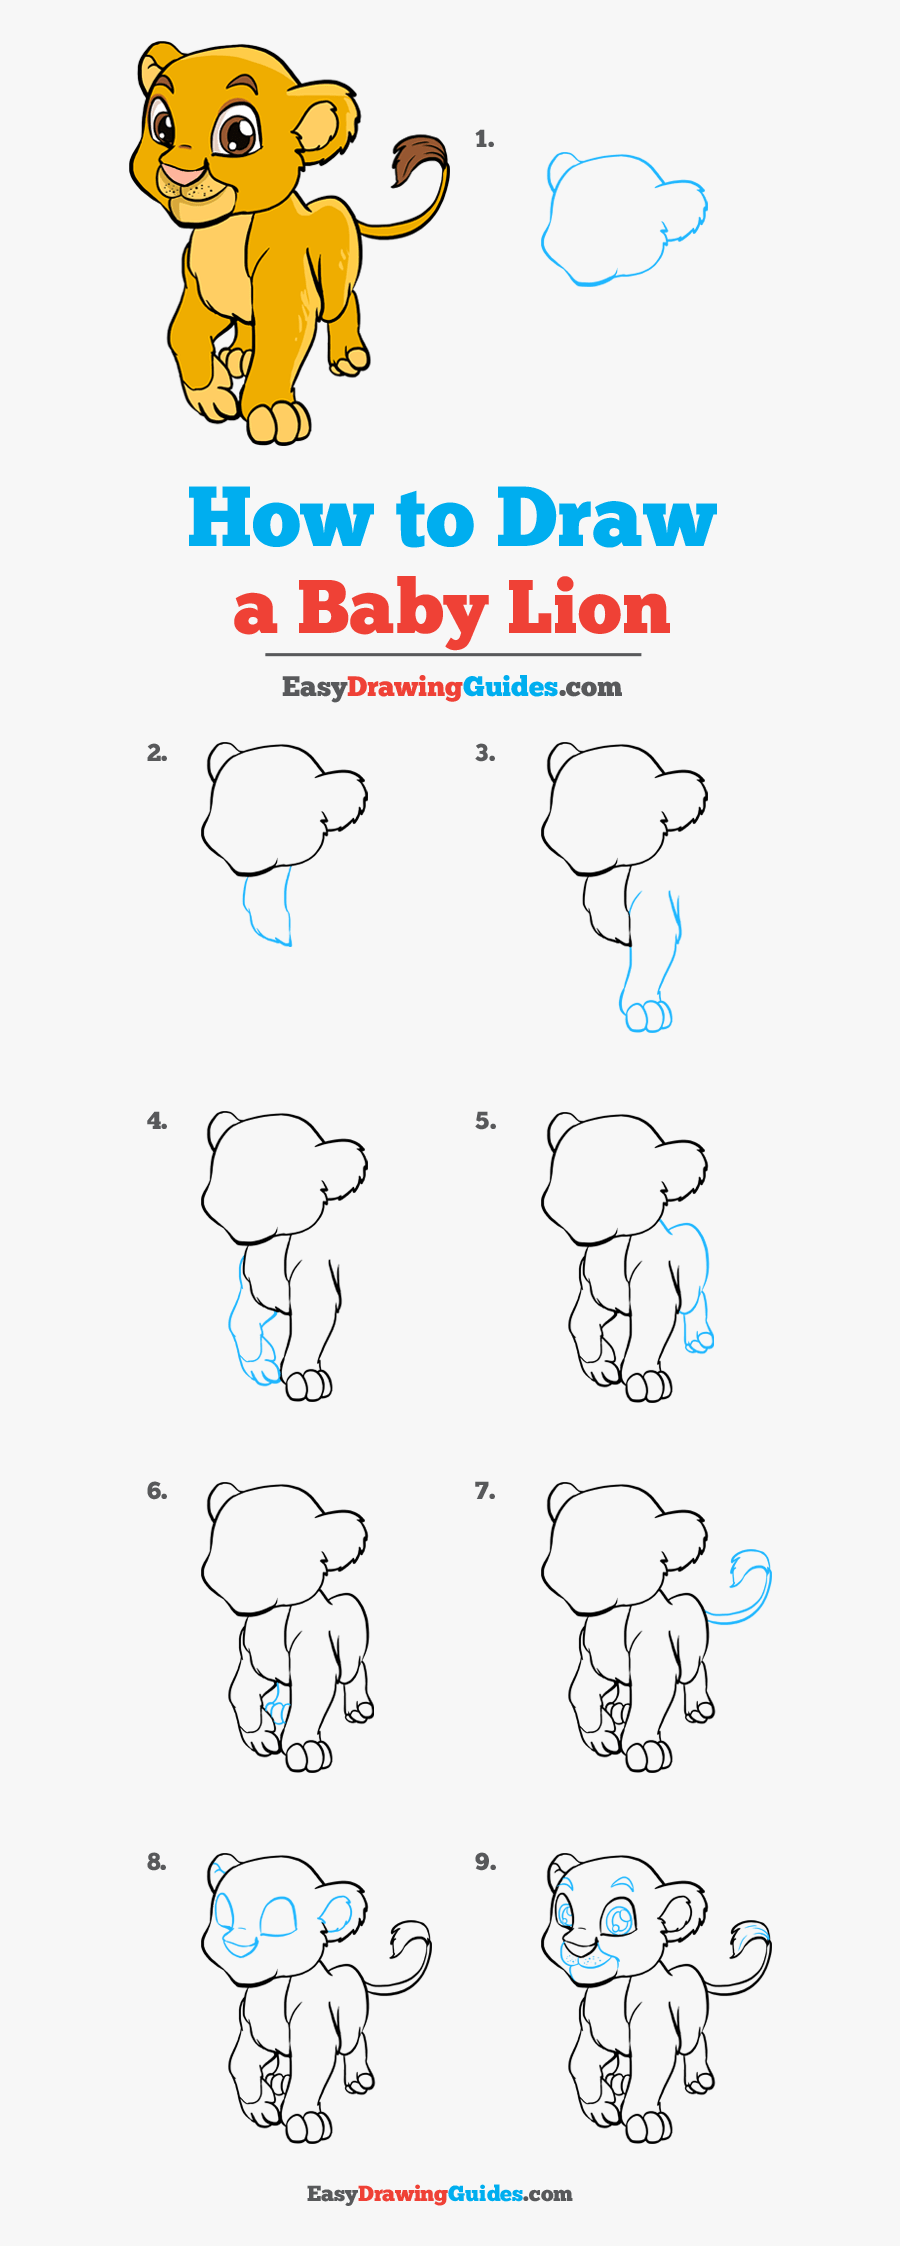 How To Draw Baby Lion - Draw A Baby Lion Step, Transparent Clipart